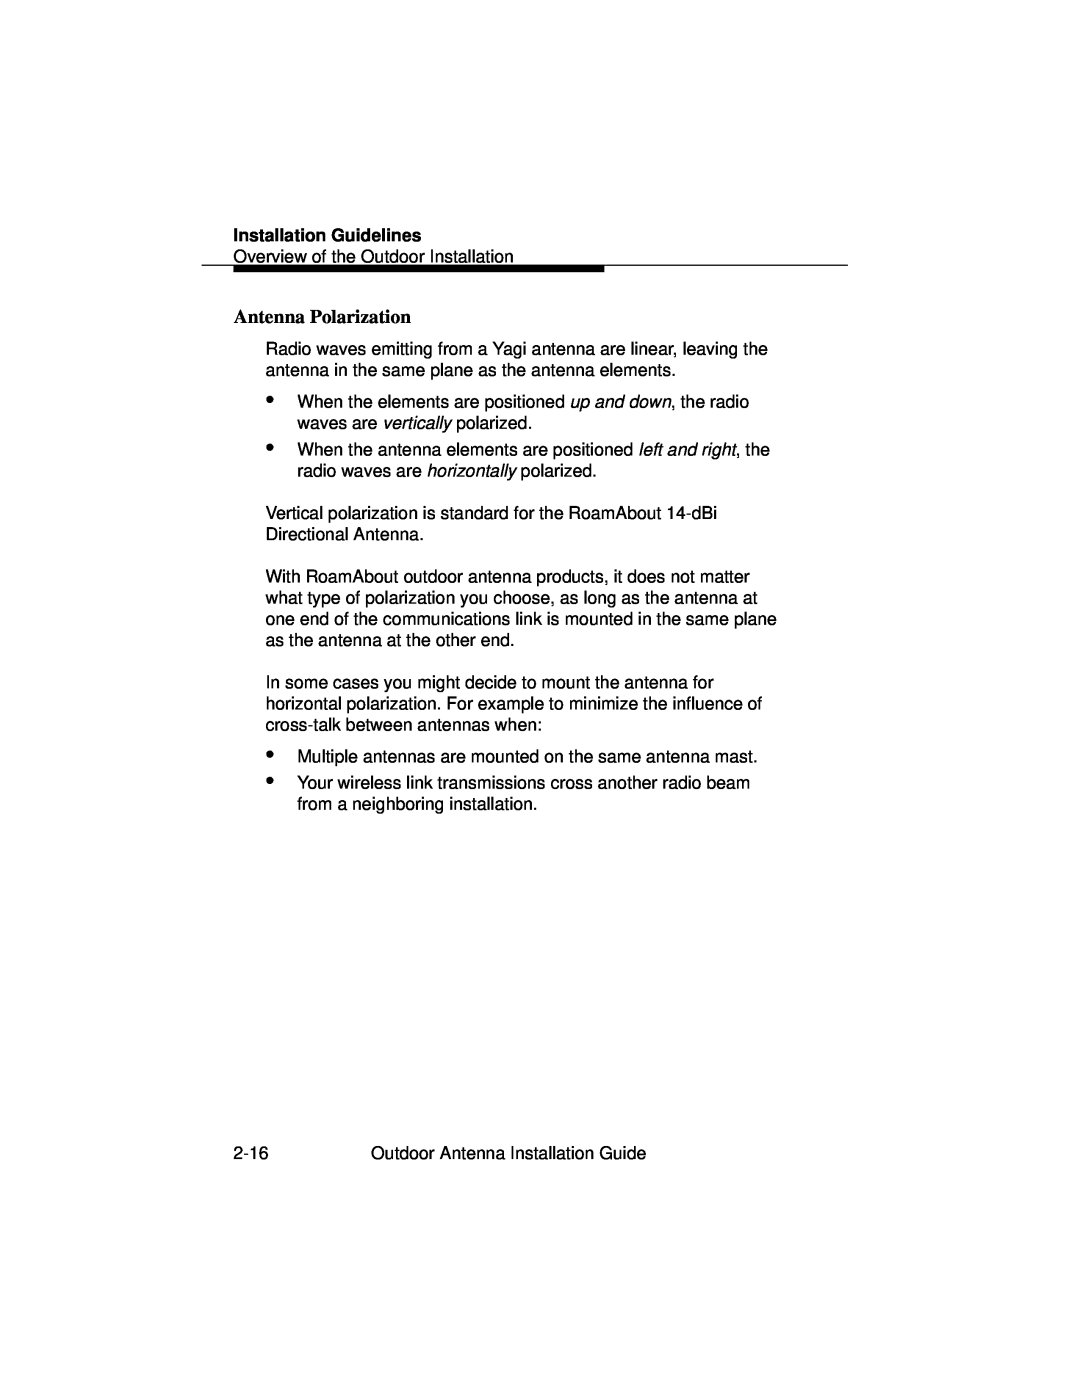 Cabletron Systems 9033073 manual Antenna Polarization, Installation Guidelines 